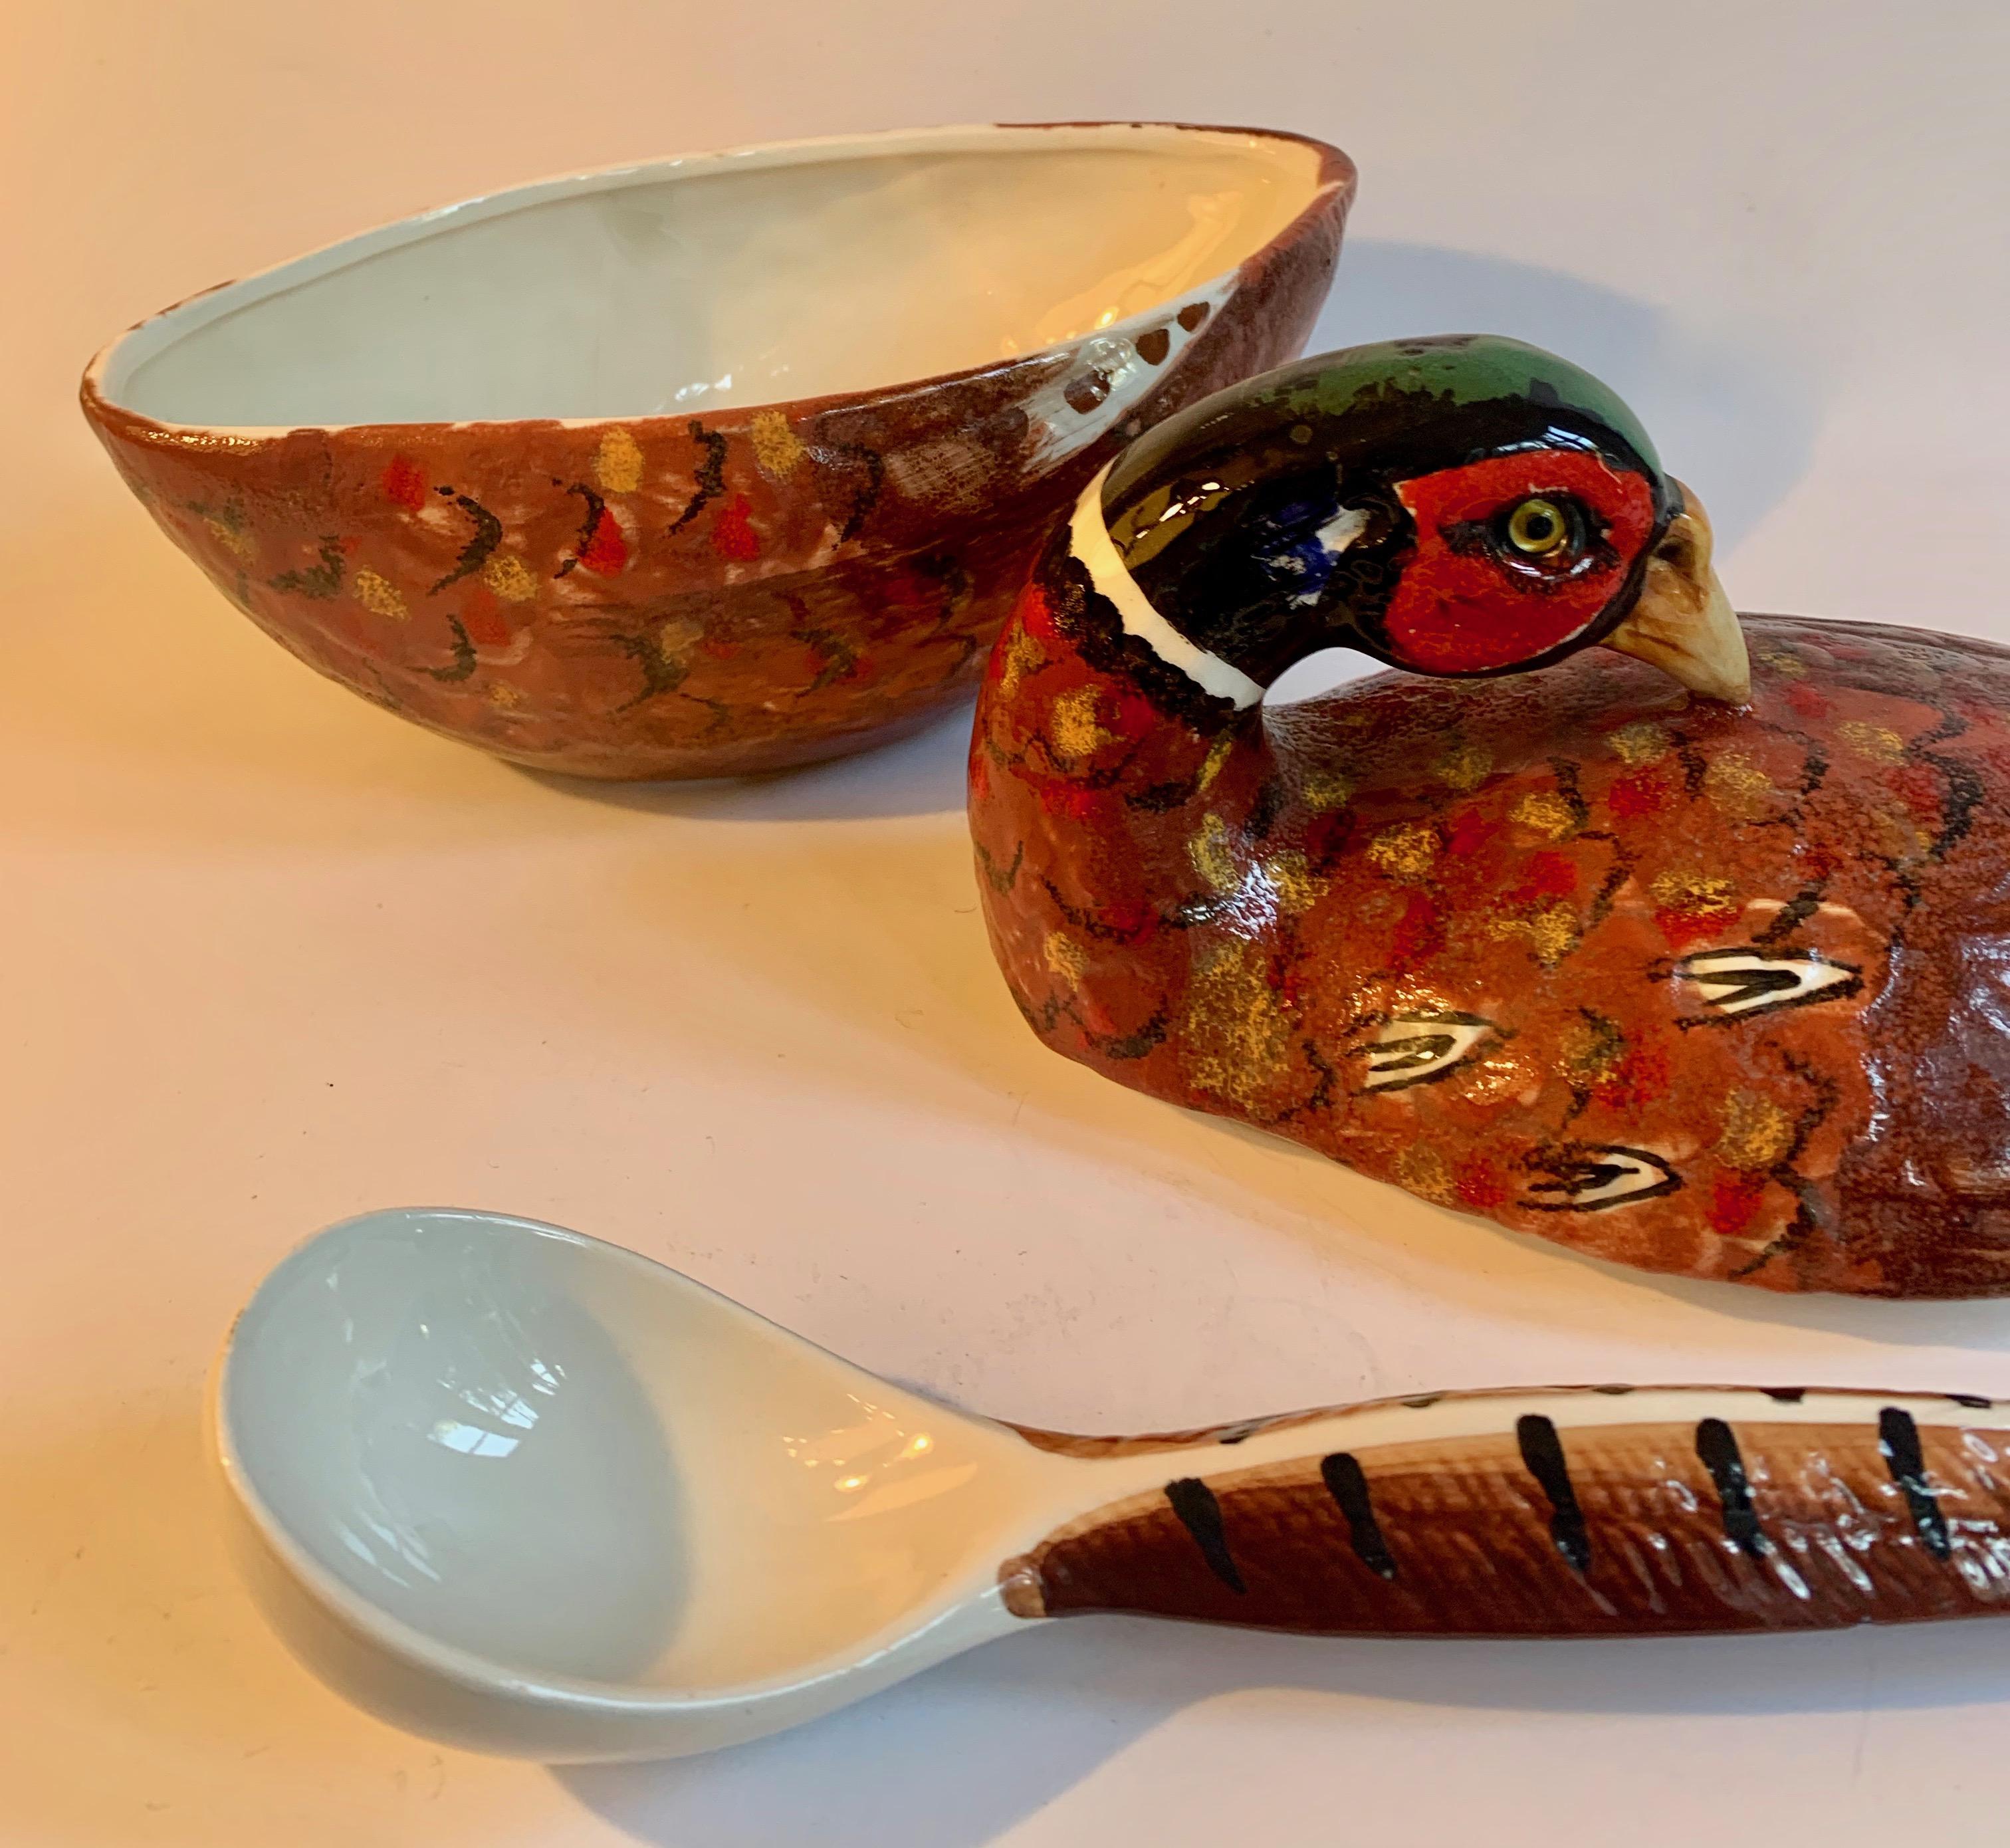 Italian hand painted Porcelain pheasant soup gravy tureen with ladle by Oggetti. A cleaver soup or gravy tureen covered by a hand painted bird like form. A wonderful piece for sharing thanks or a simple dinner for two with soup.  The pheasant has